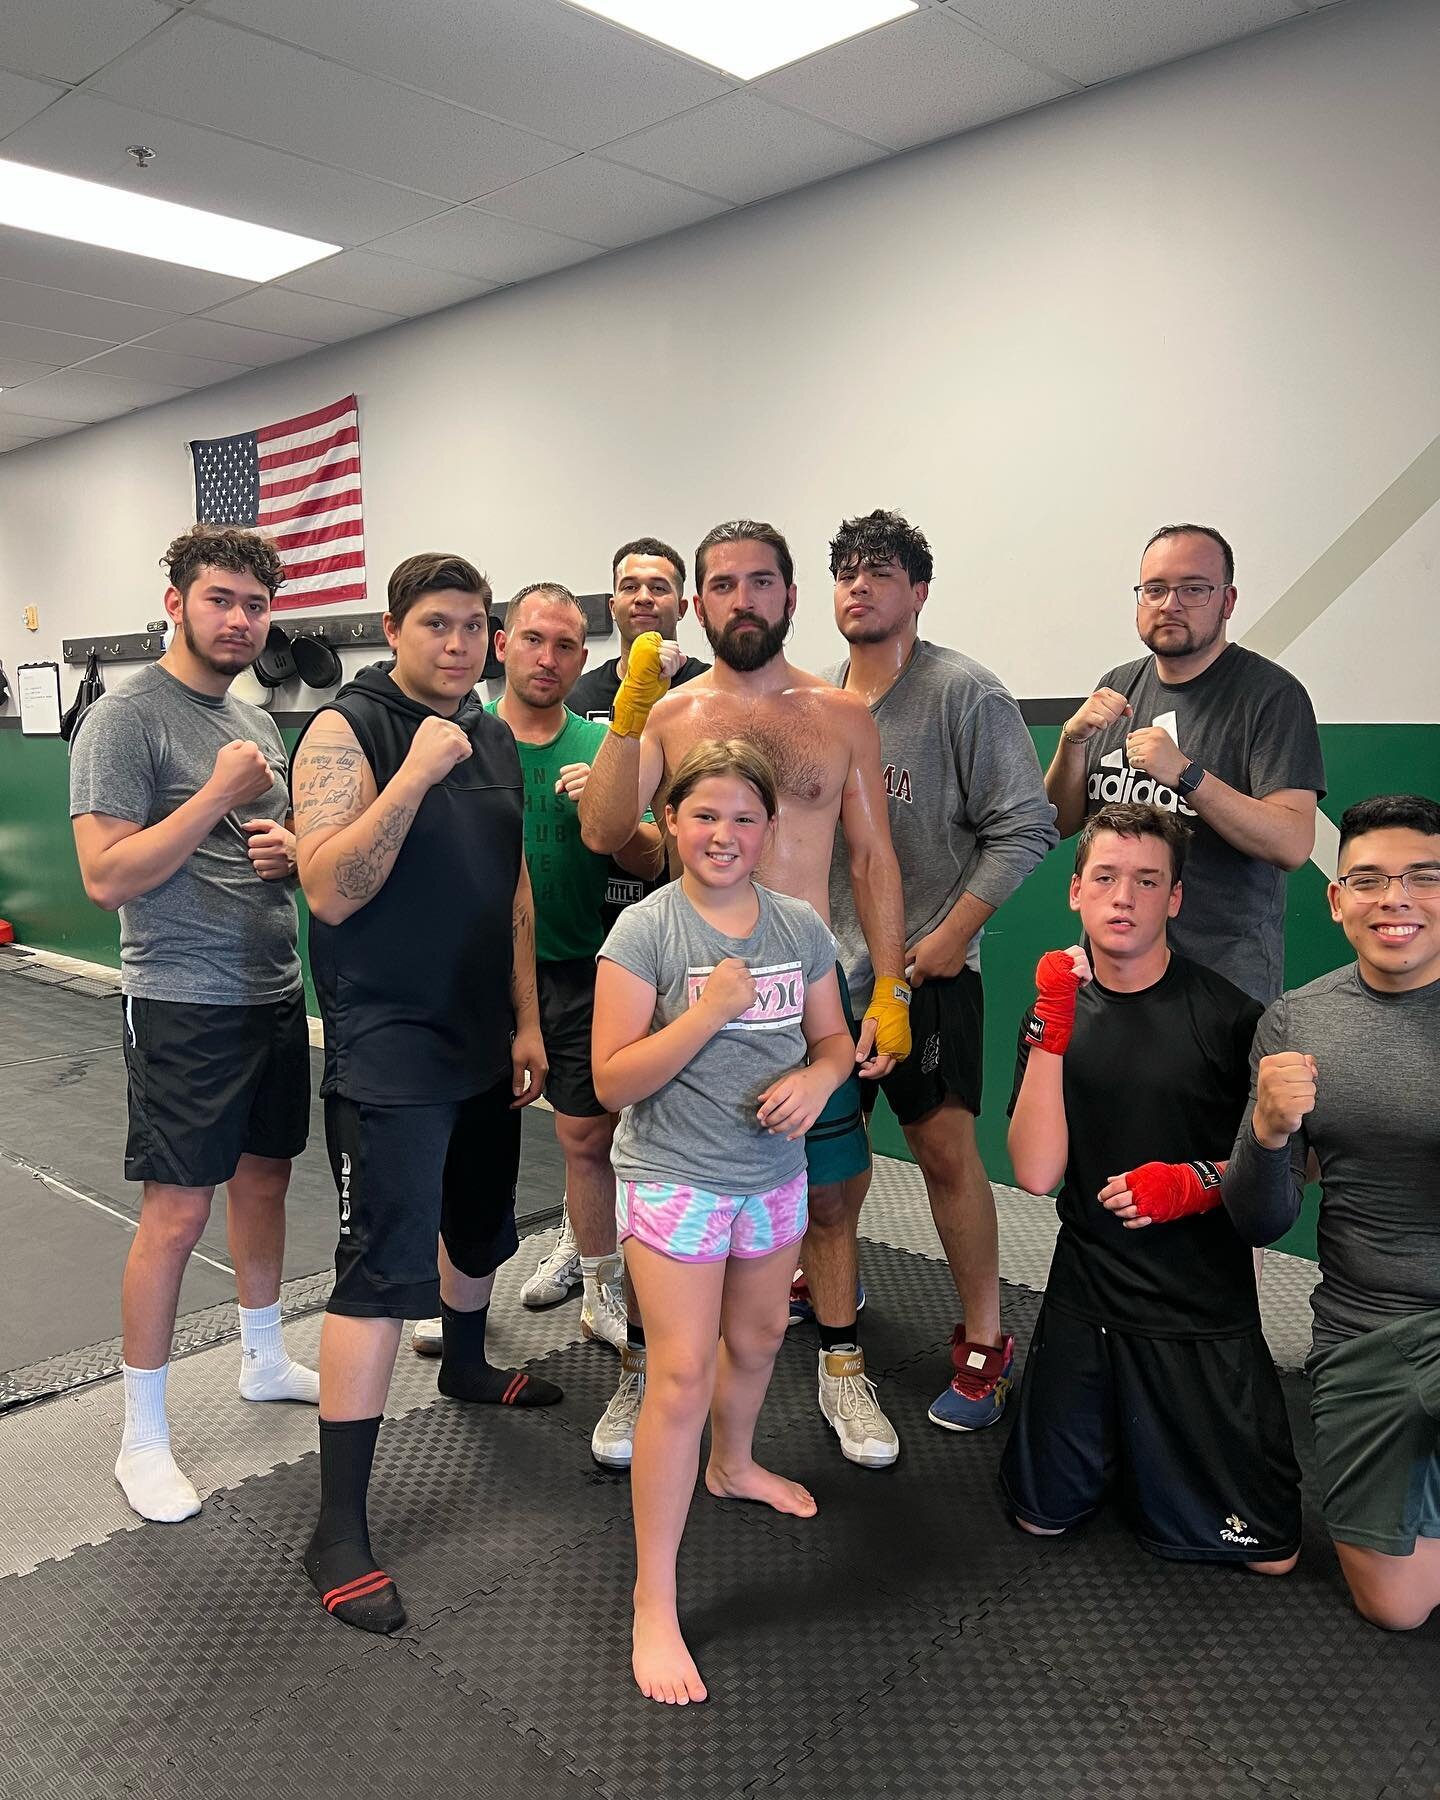 Another great Saturday morning open gym is wrapped up! One of our favorite times of the week 🤩 Love seeing everyone come out and put in some good, hard work. See you next time!
&bull;
&bull;
&bull;
&bull;
&bull;
&bull;
#boxing #kickboxing #mma #fitn